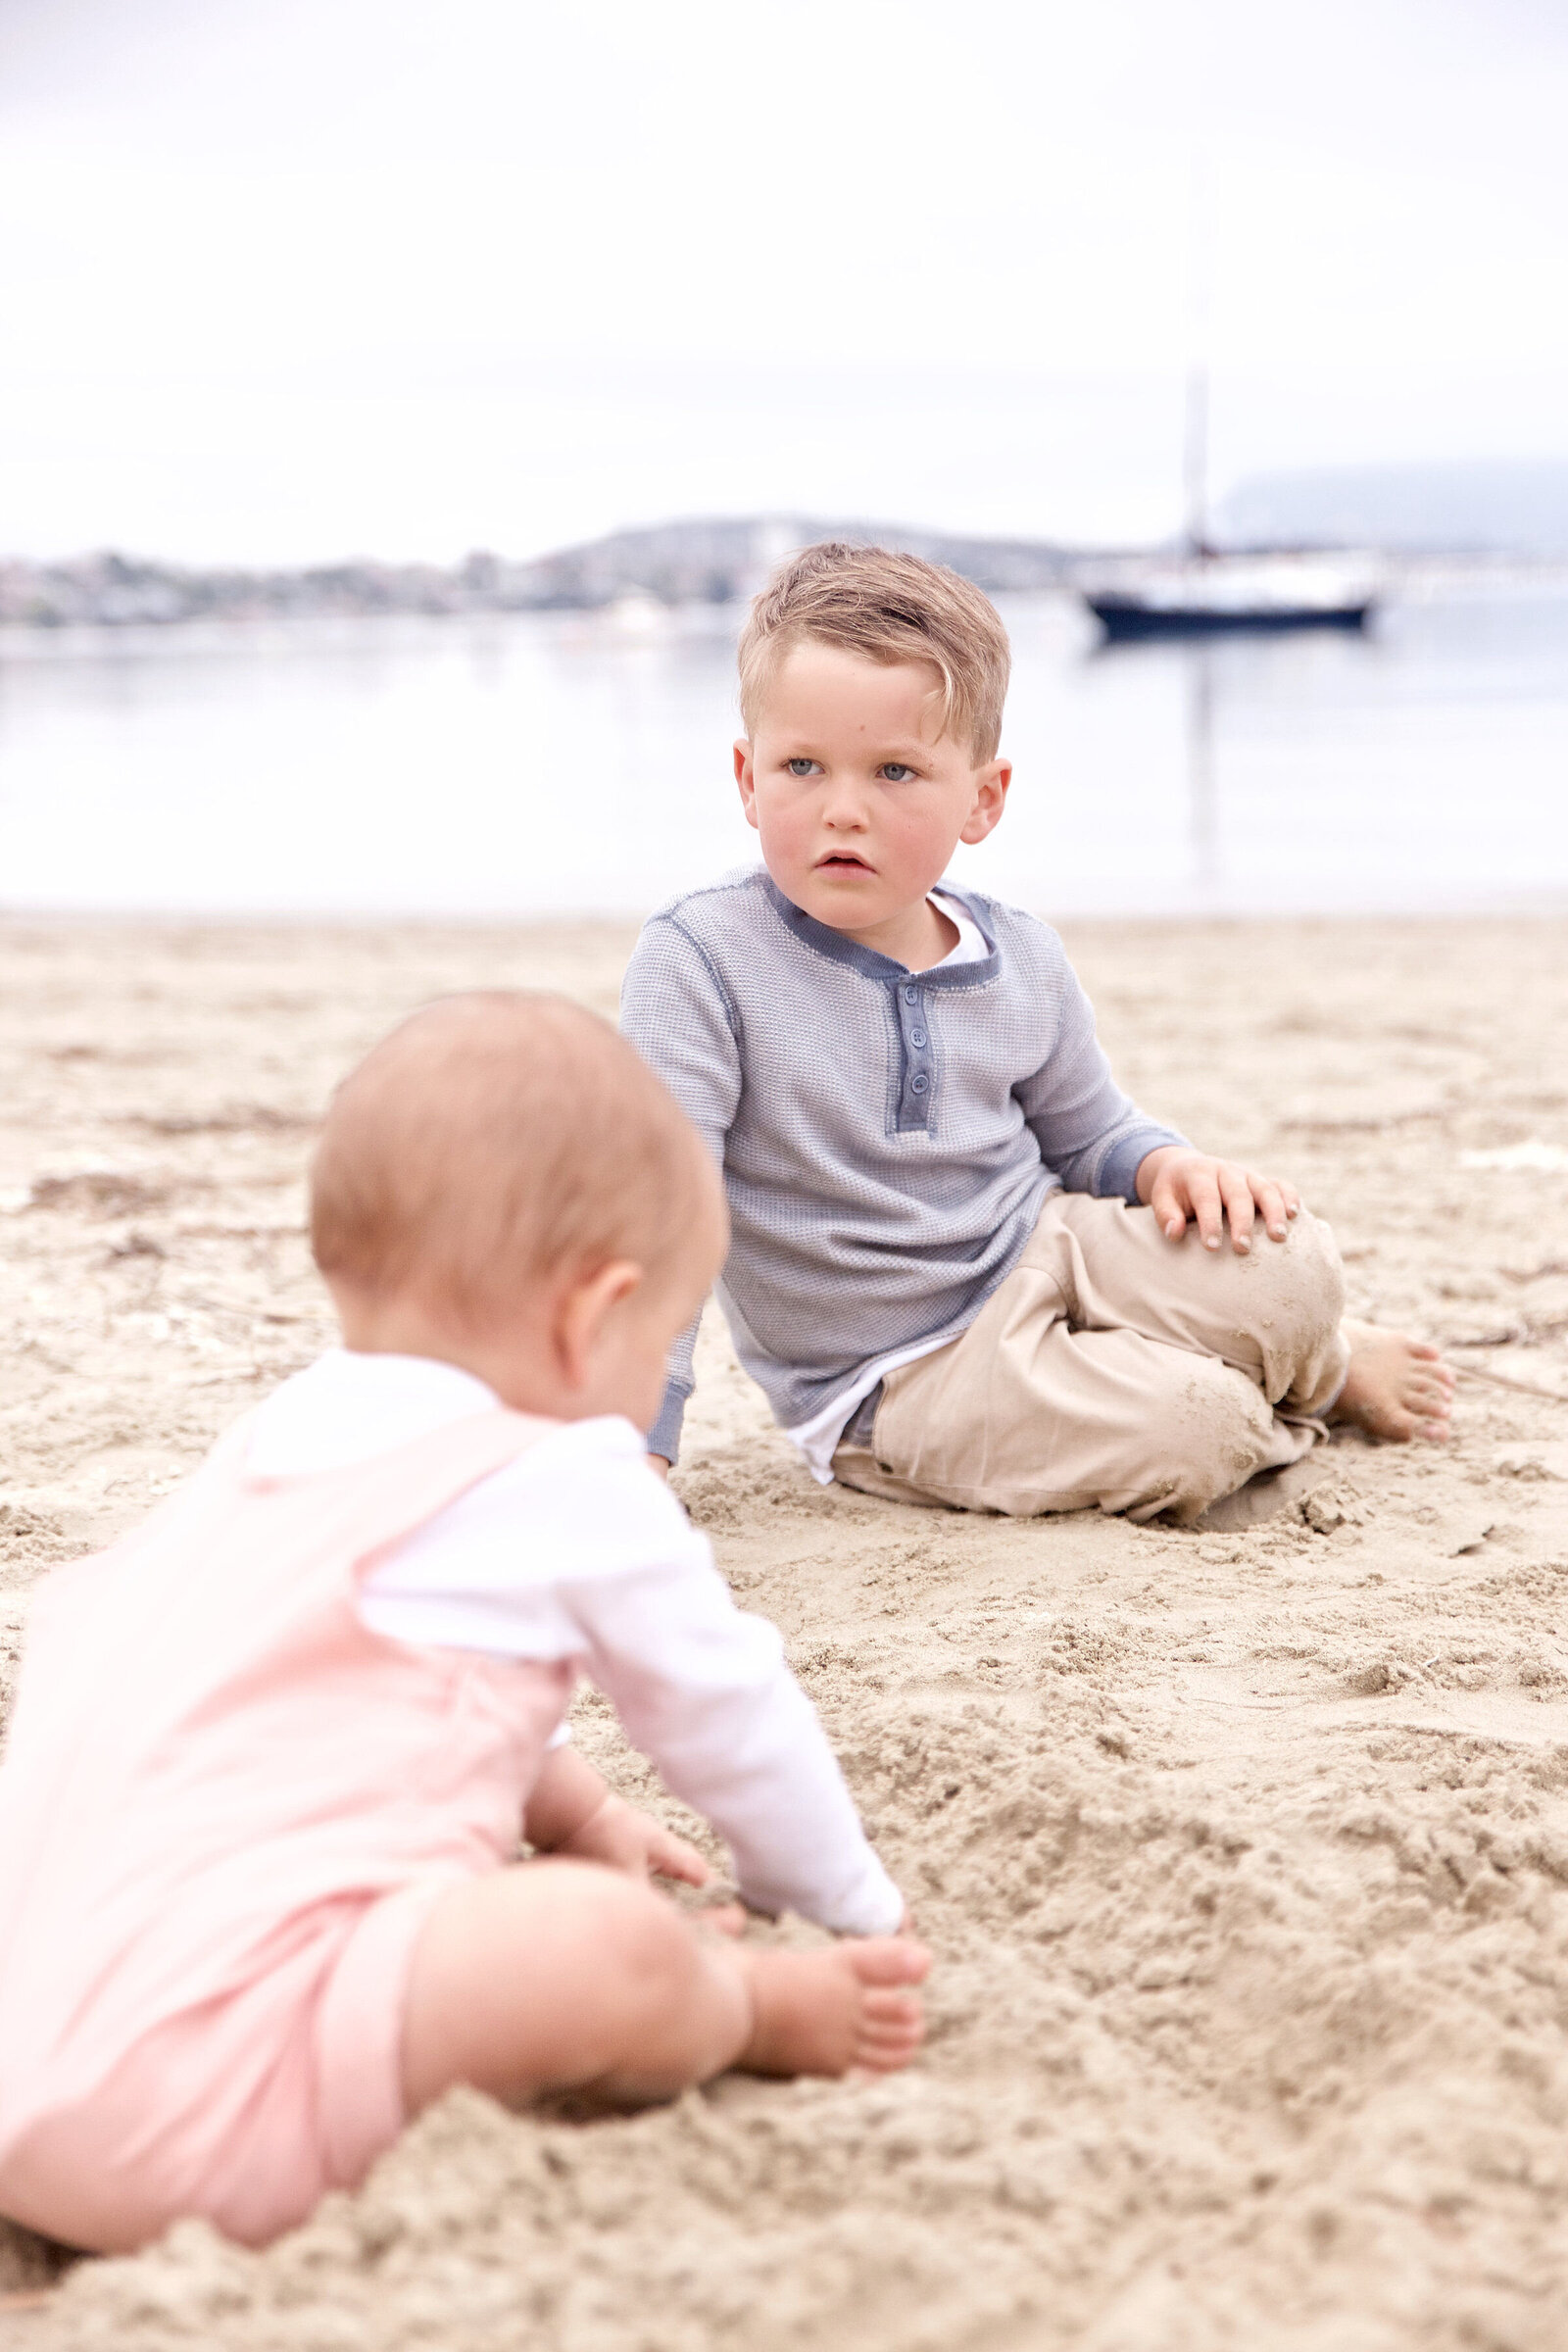 Two kids on the beach in cute cloths for a clothing photoshoot campaign